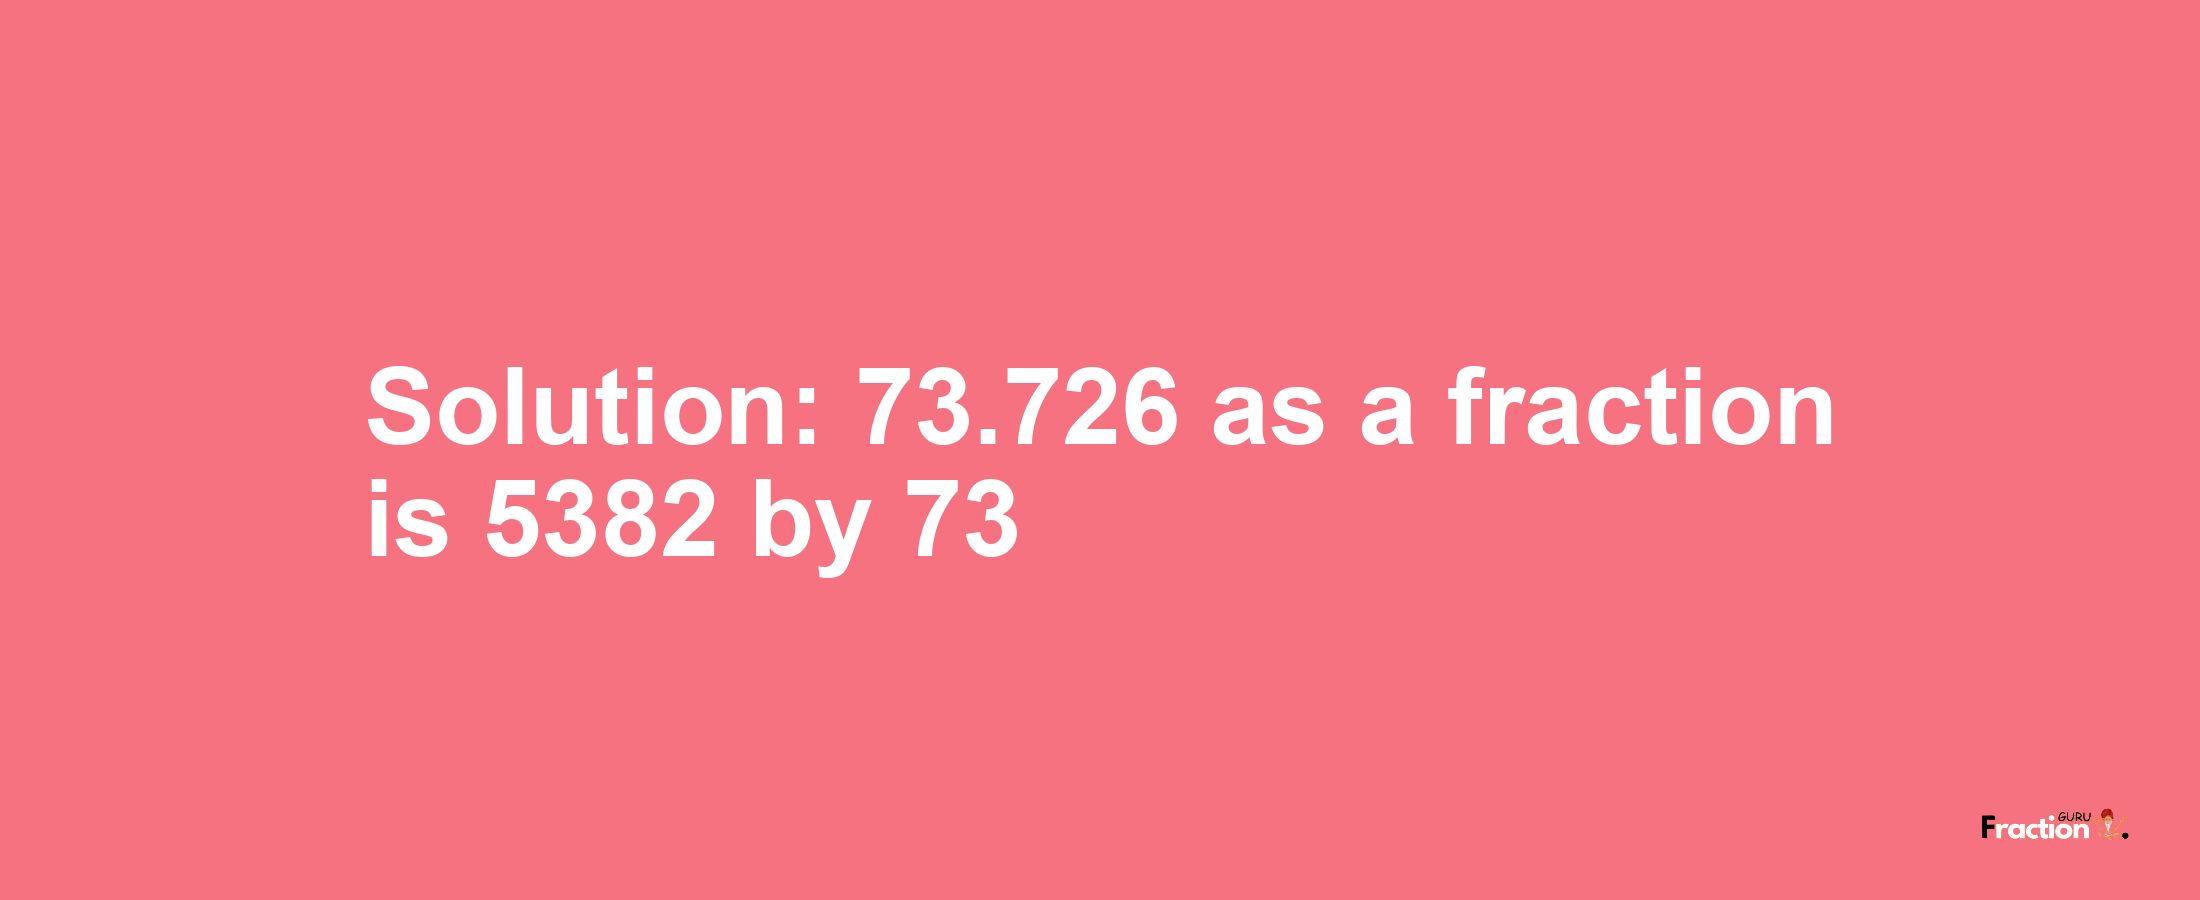 Solution:73.726 as a fraction is 5382/73